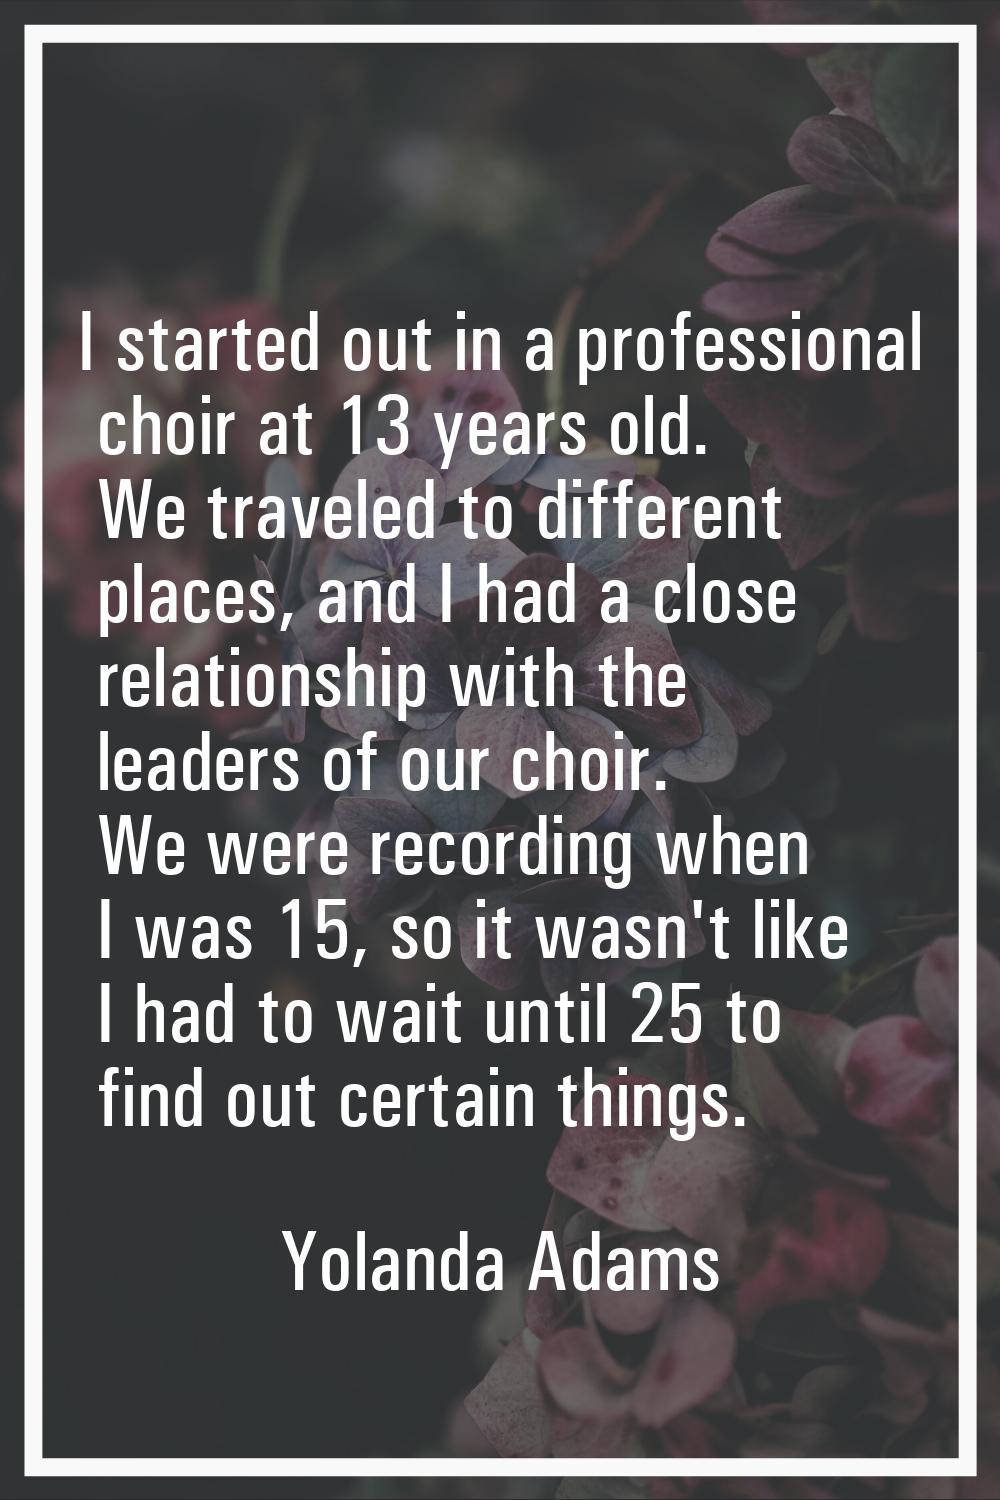 I started out in a professional choir at 13 years old. We traveled to different places, and I had a